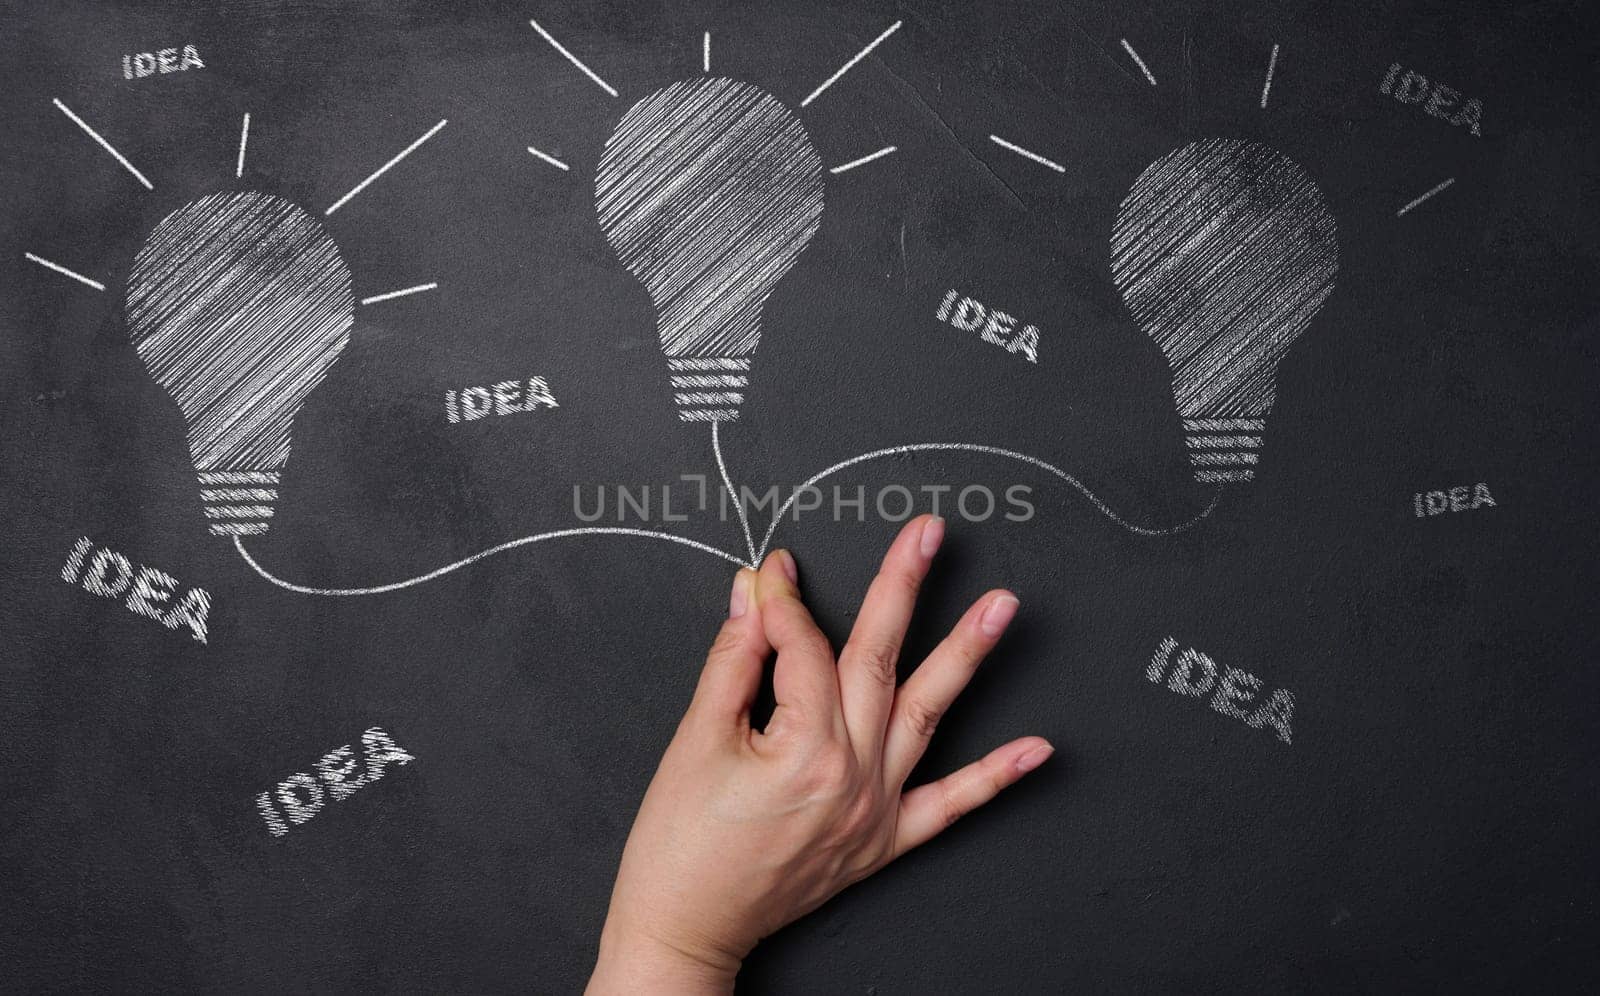 Drawn light bulbs with white chalk on a black board and a woman's hand searching for new ideas by ndanko